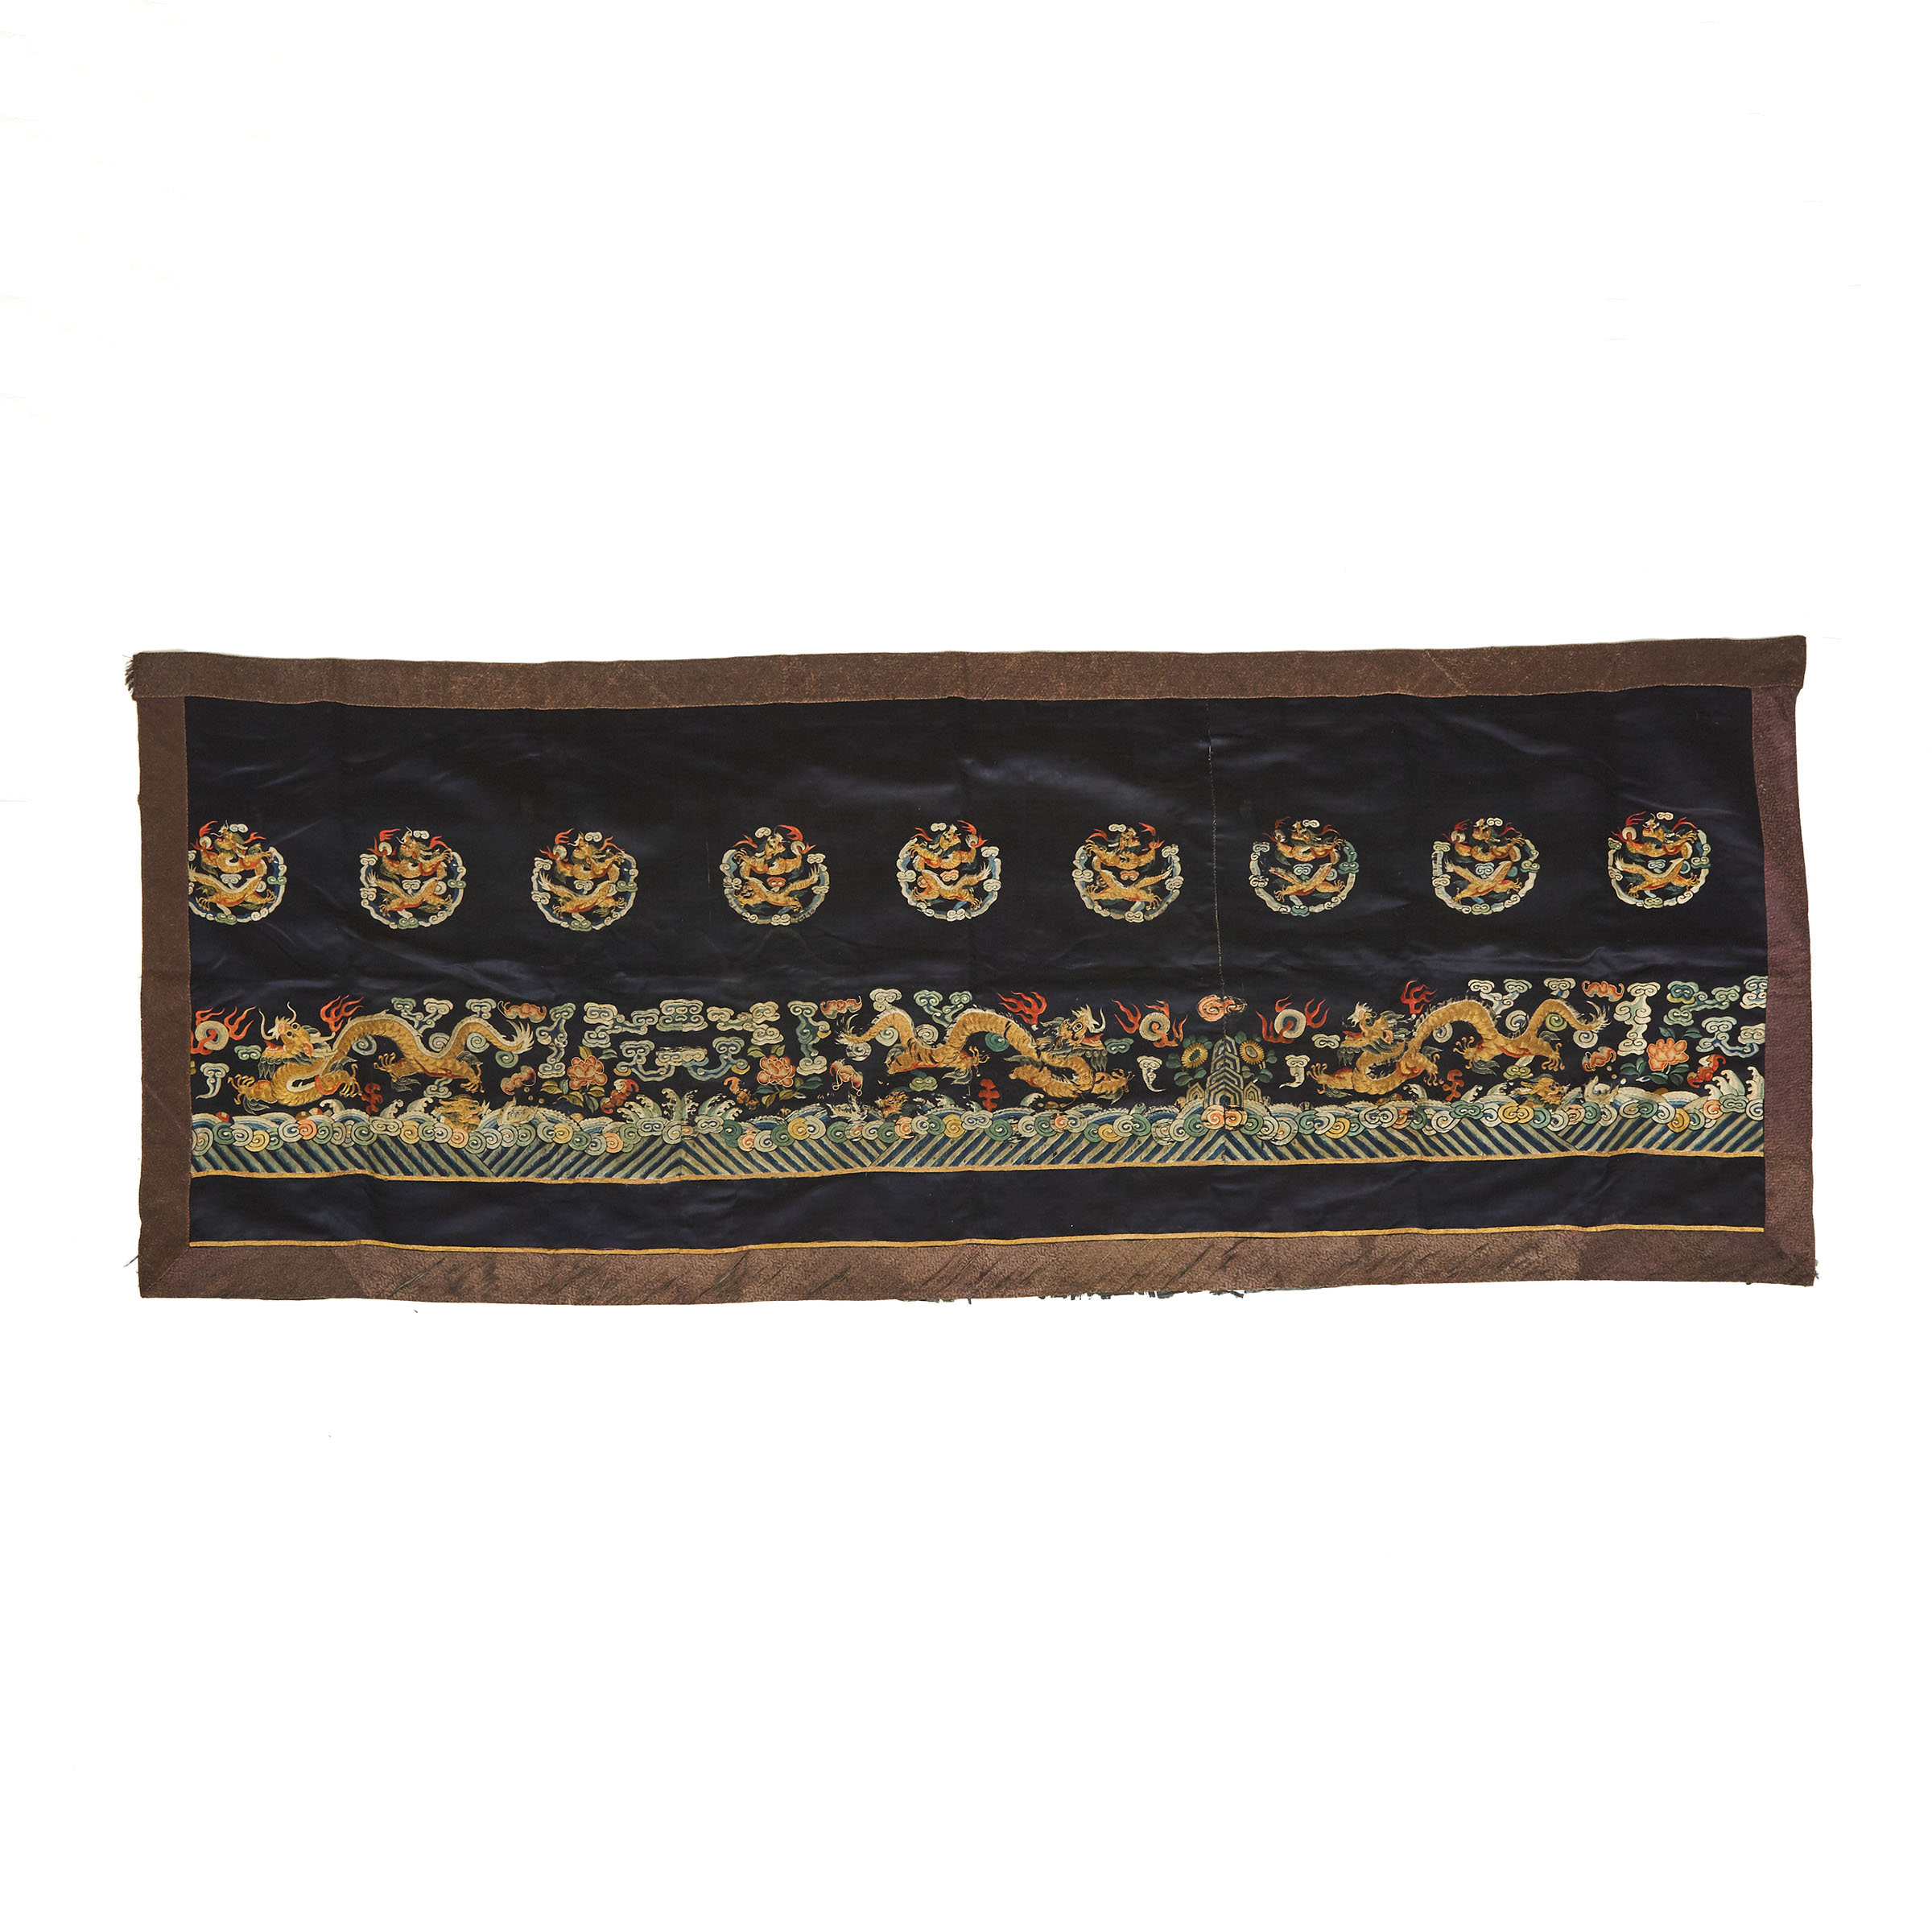 An Embroidered Blue-Ground Panel From a Court Skirt, Qing Dynasty, 19th Century